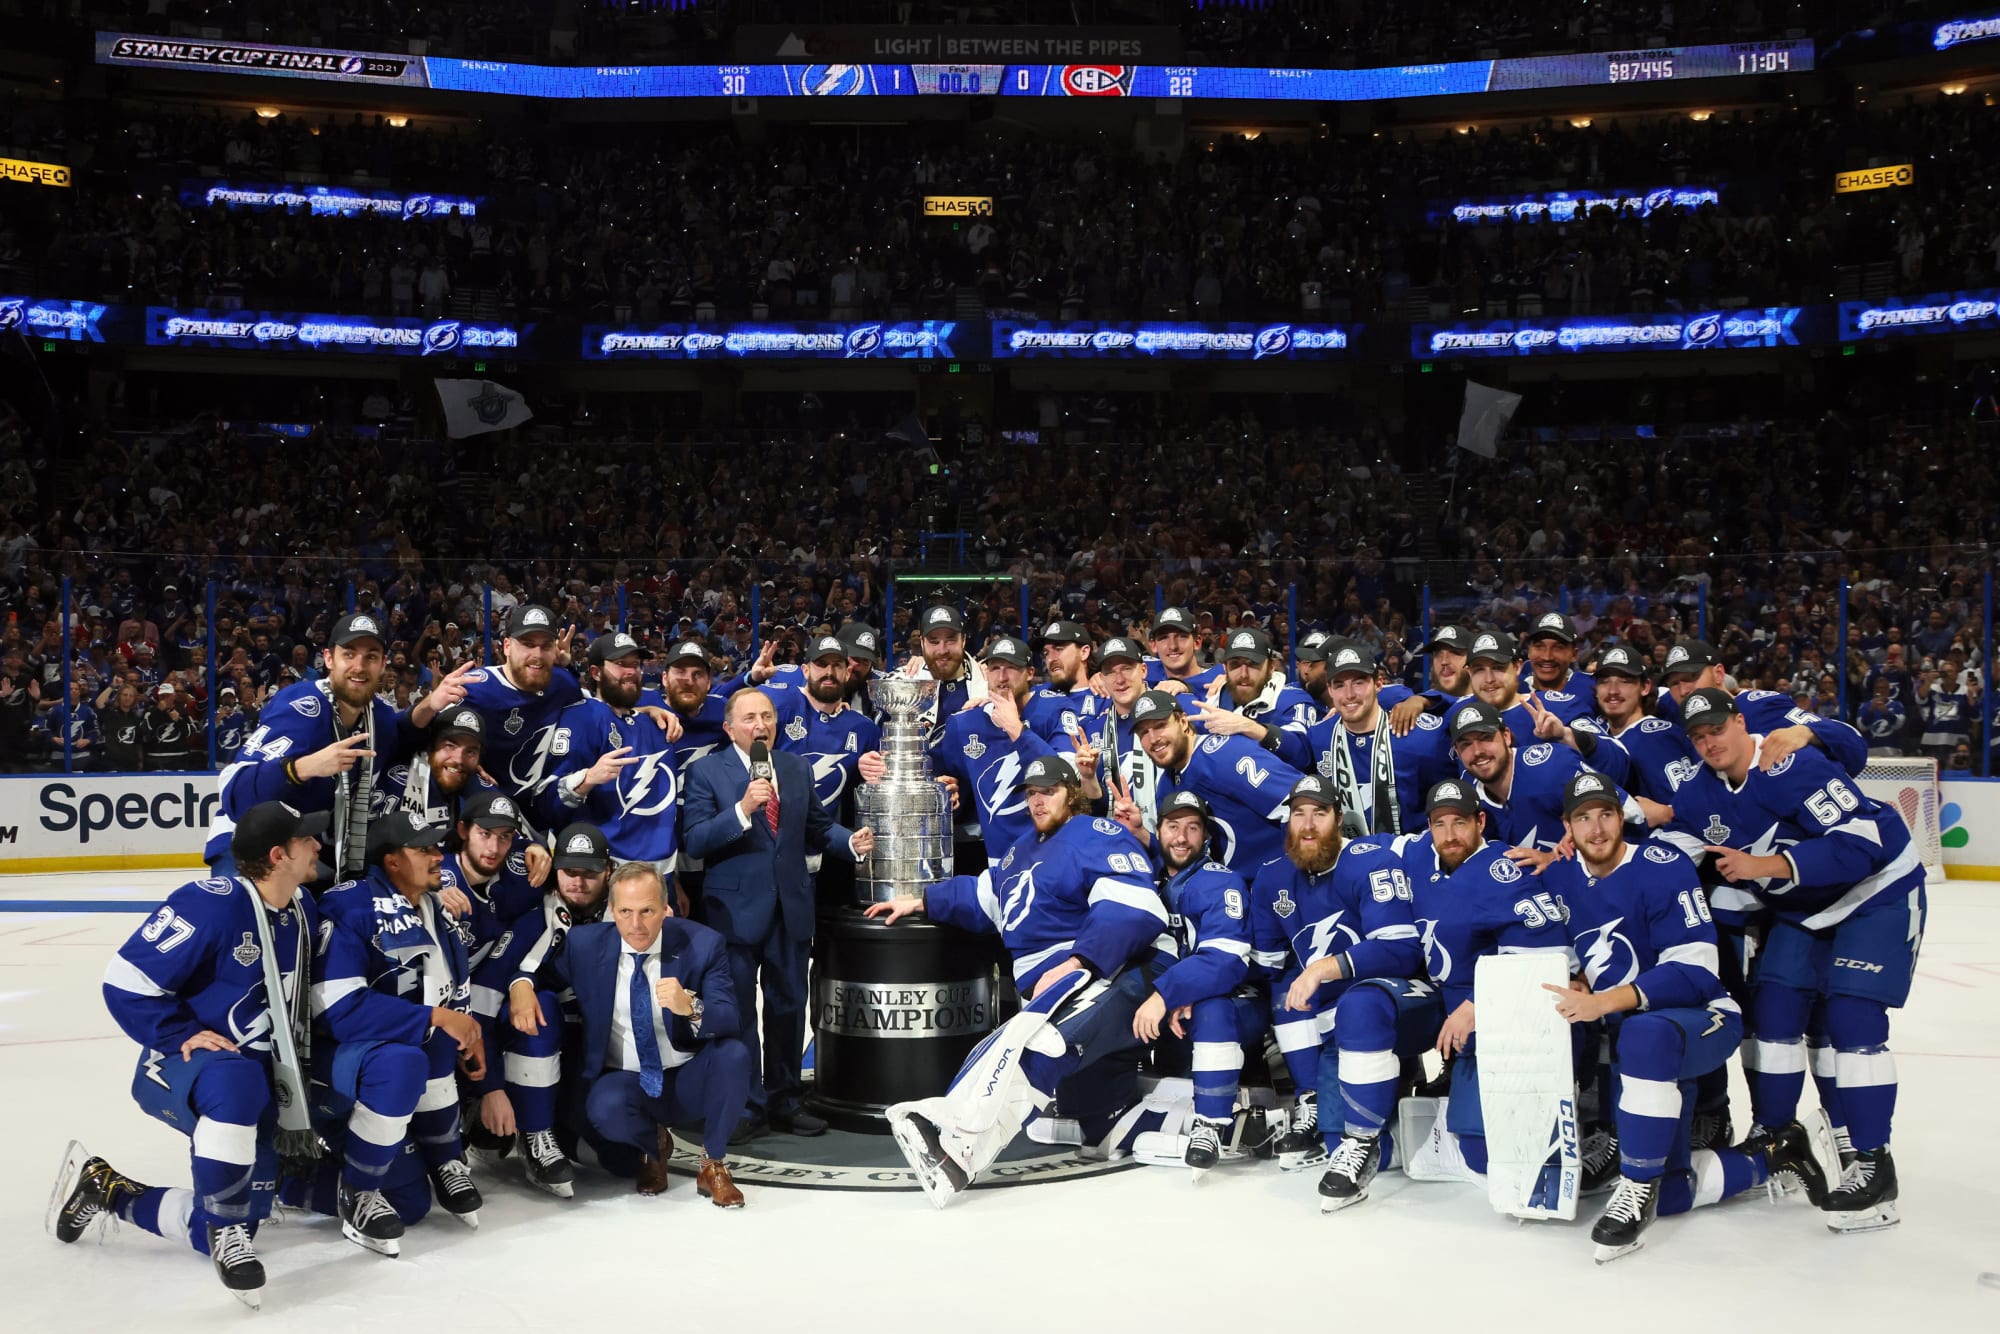 2021 Stanley Cup Final: The Tampa Bay Lightning repeat as Stanley Cup